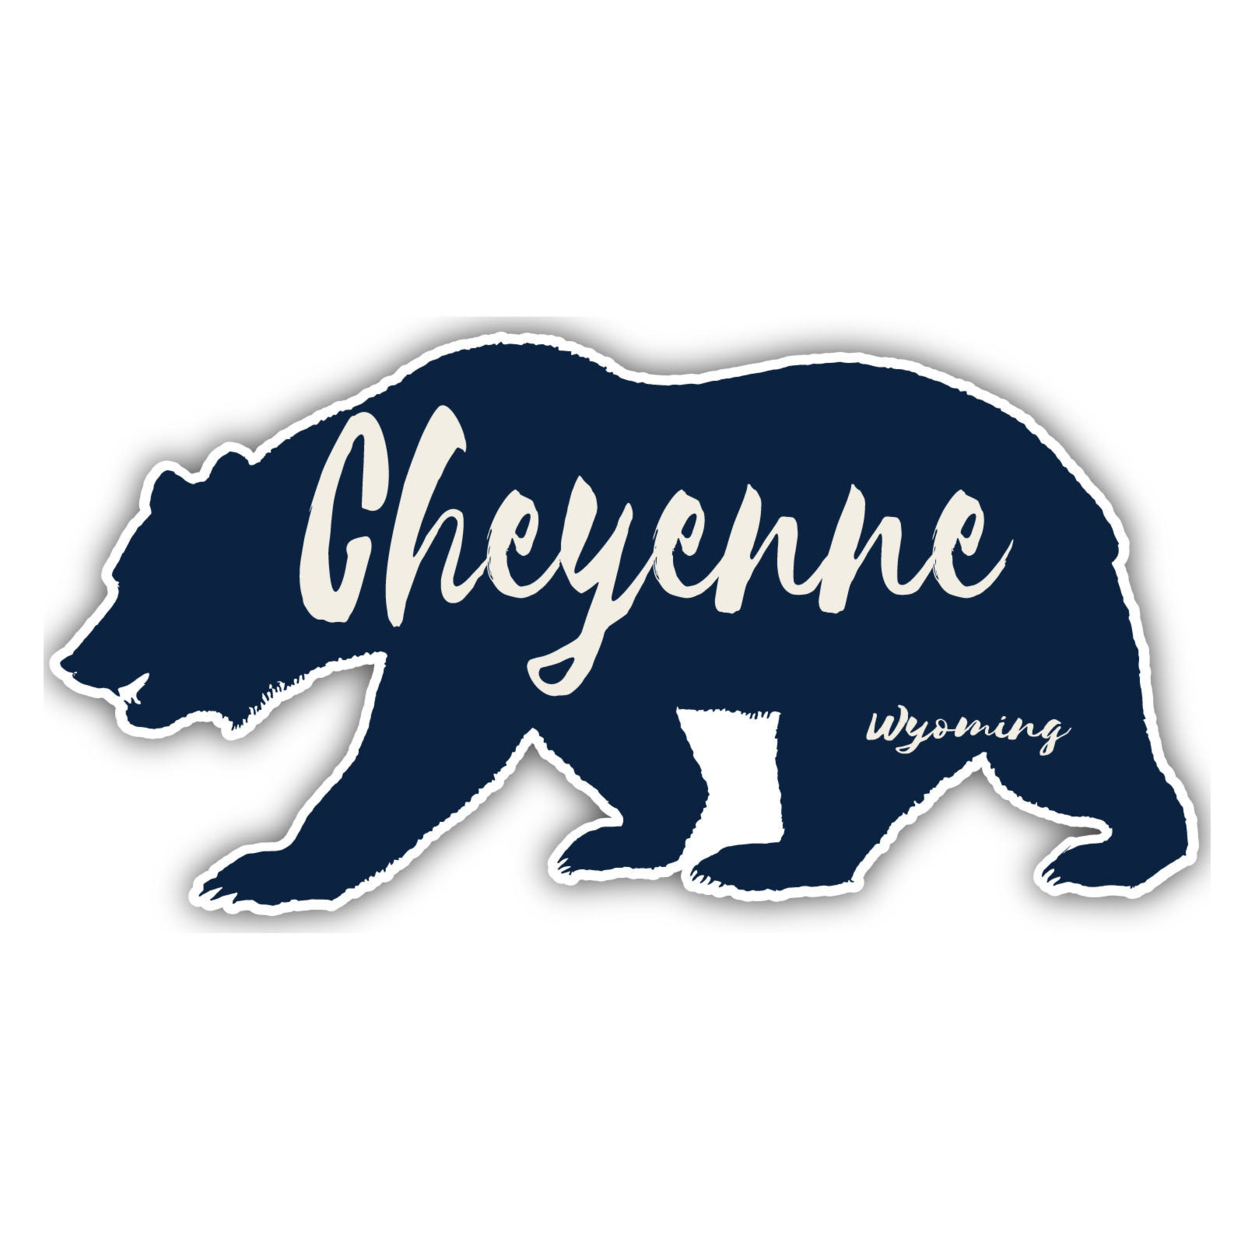 Cheyenne Wyoming Souvenir Decorative Stickers (Choose Theme And Size) - 4-Pack, 8-Inch, Camp Life